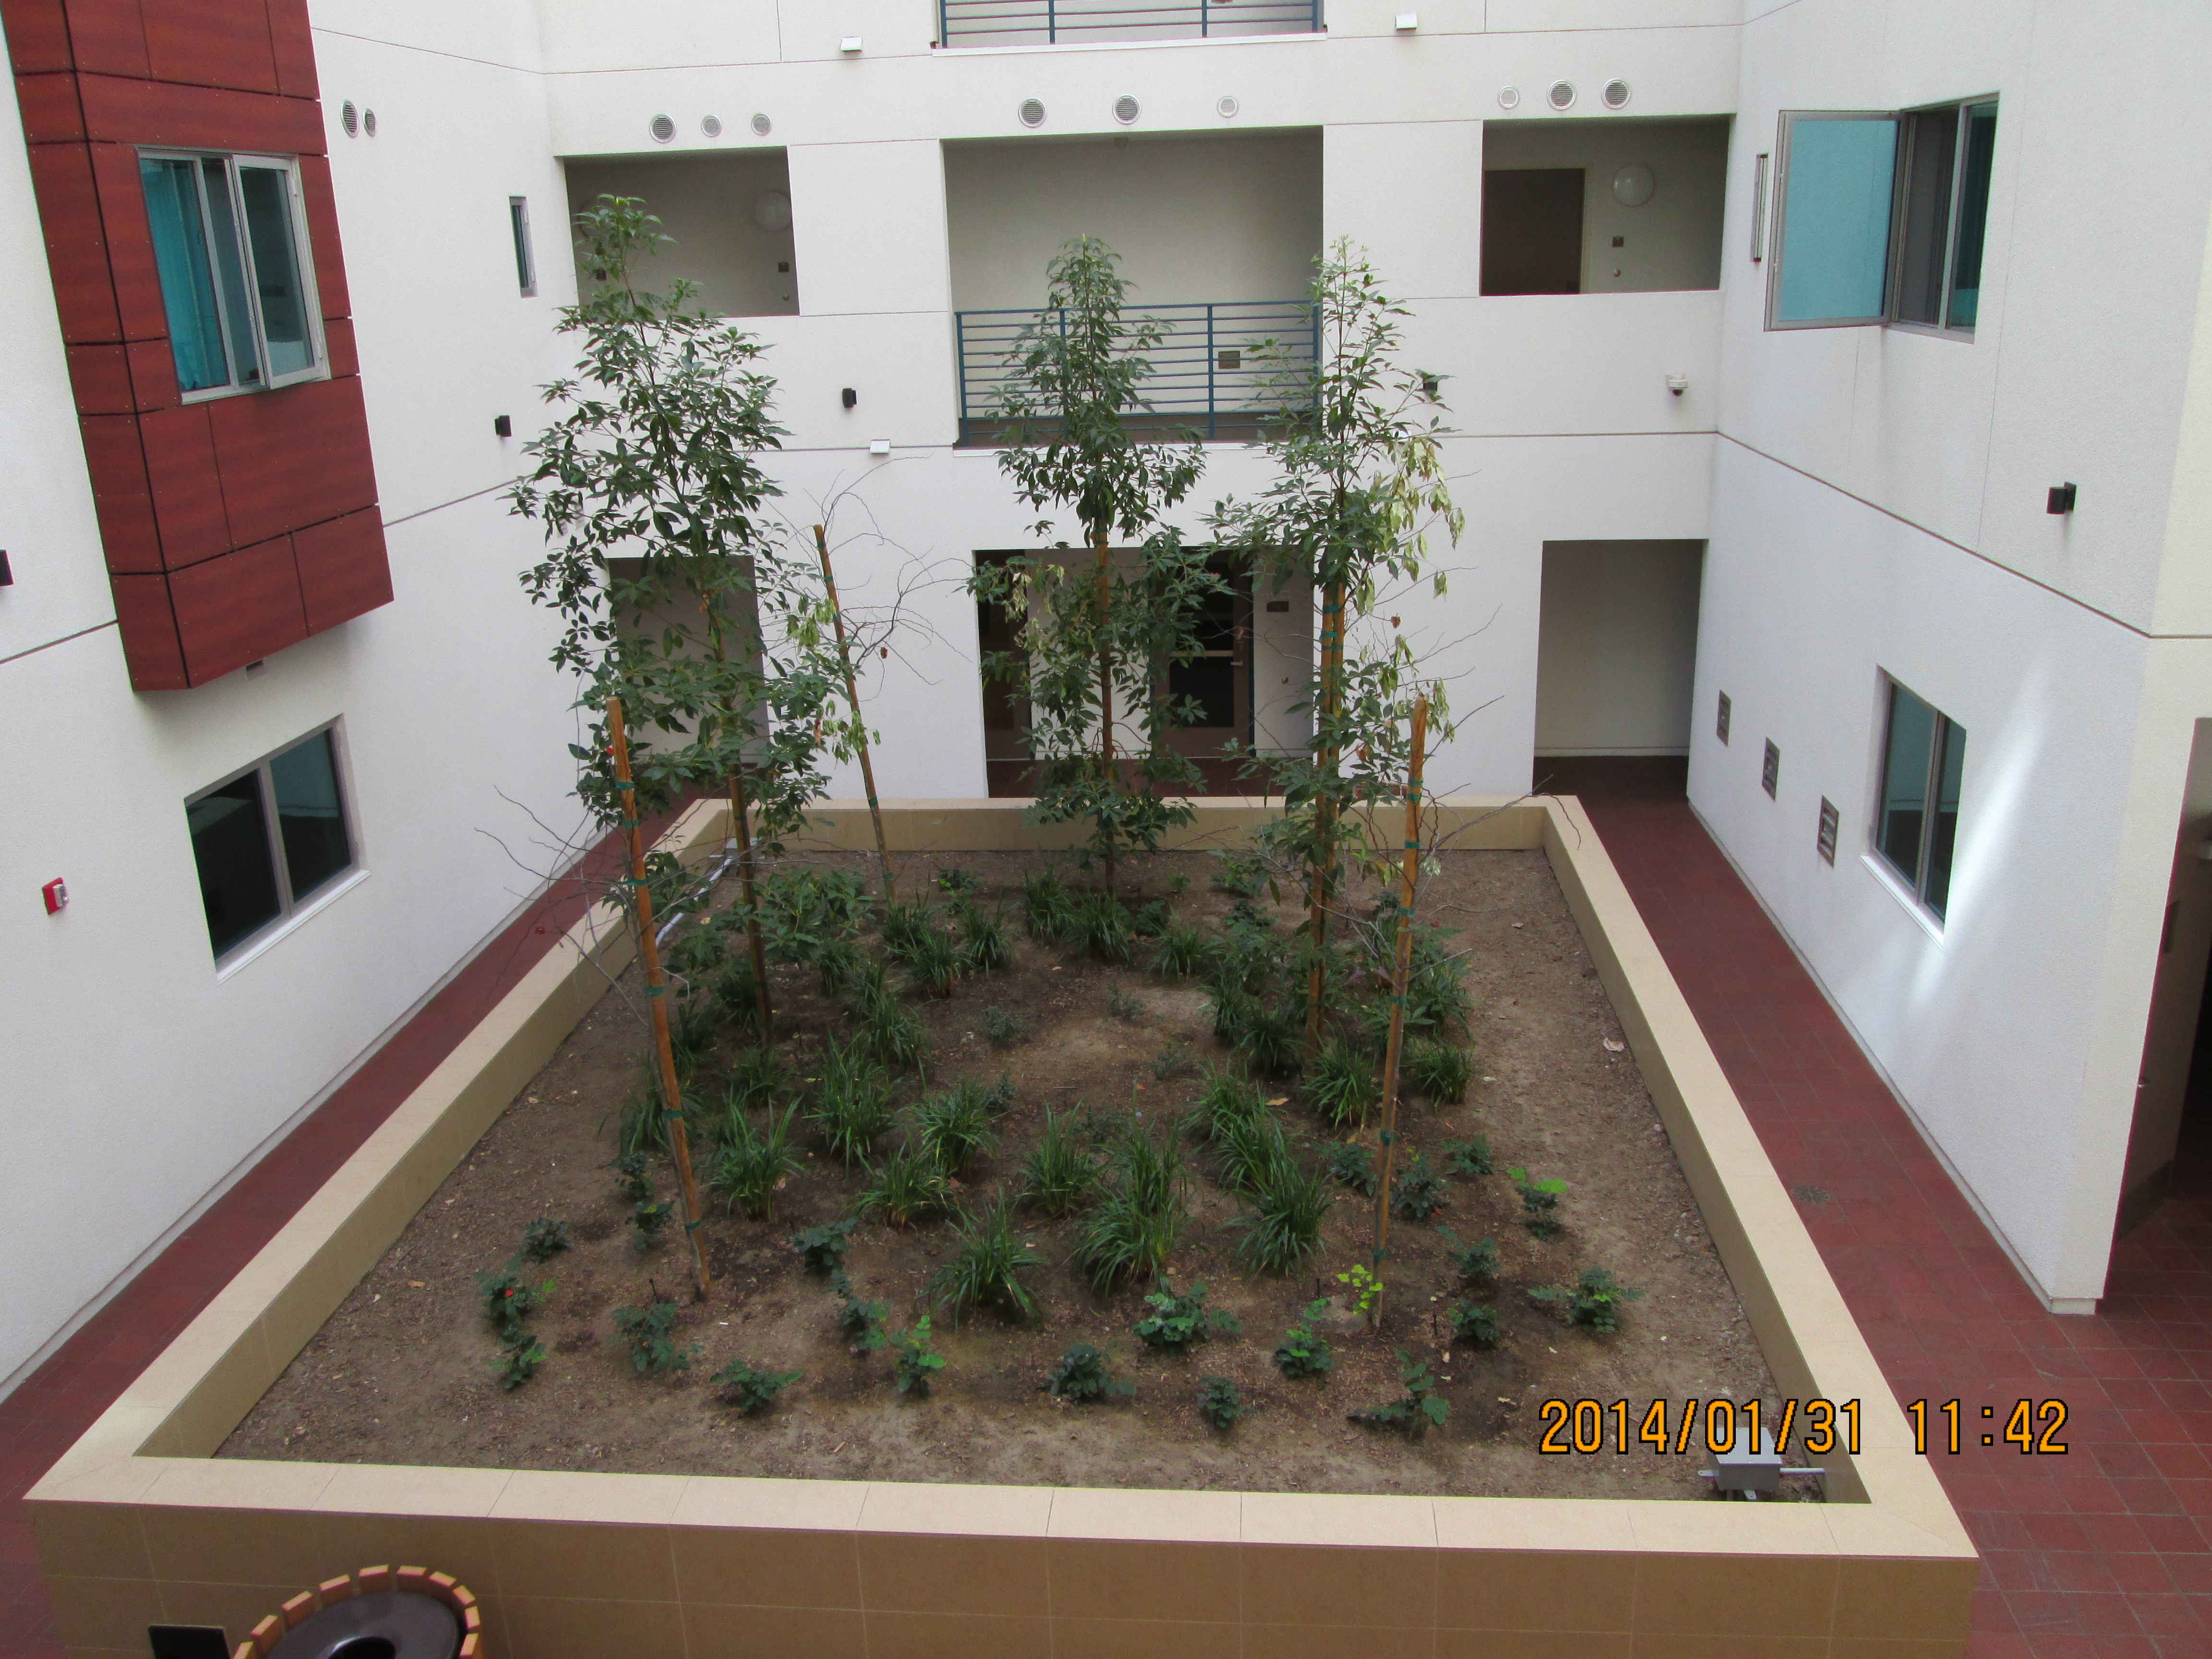 Image og gateways apartments common area. large square raised planter with trees and plants. walkway on all four sides